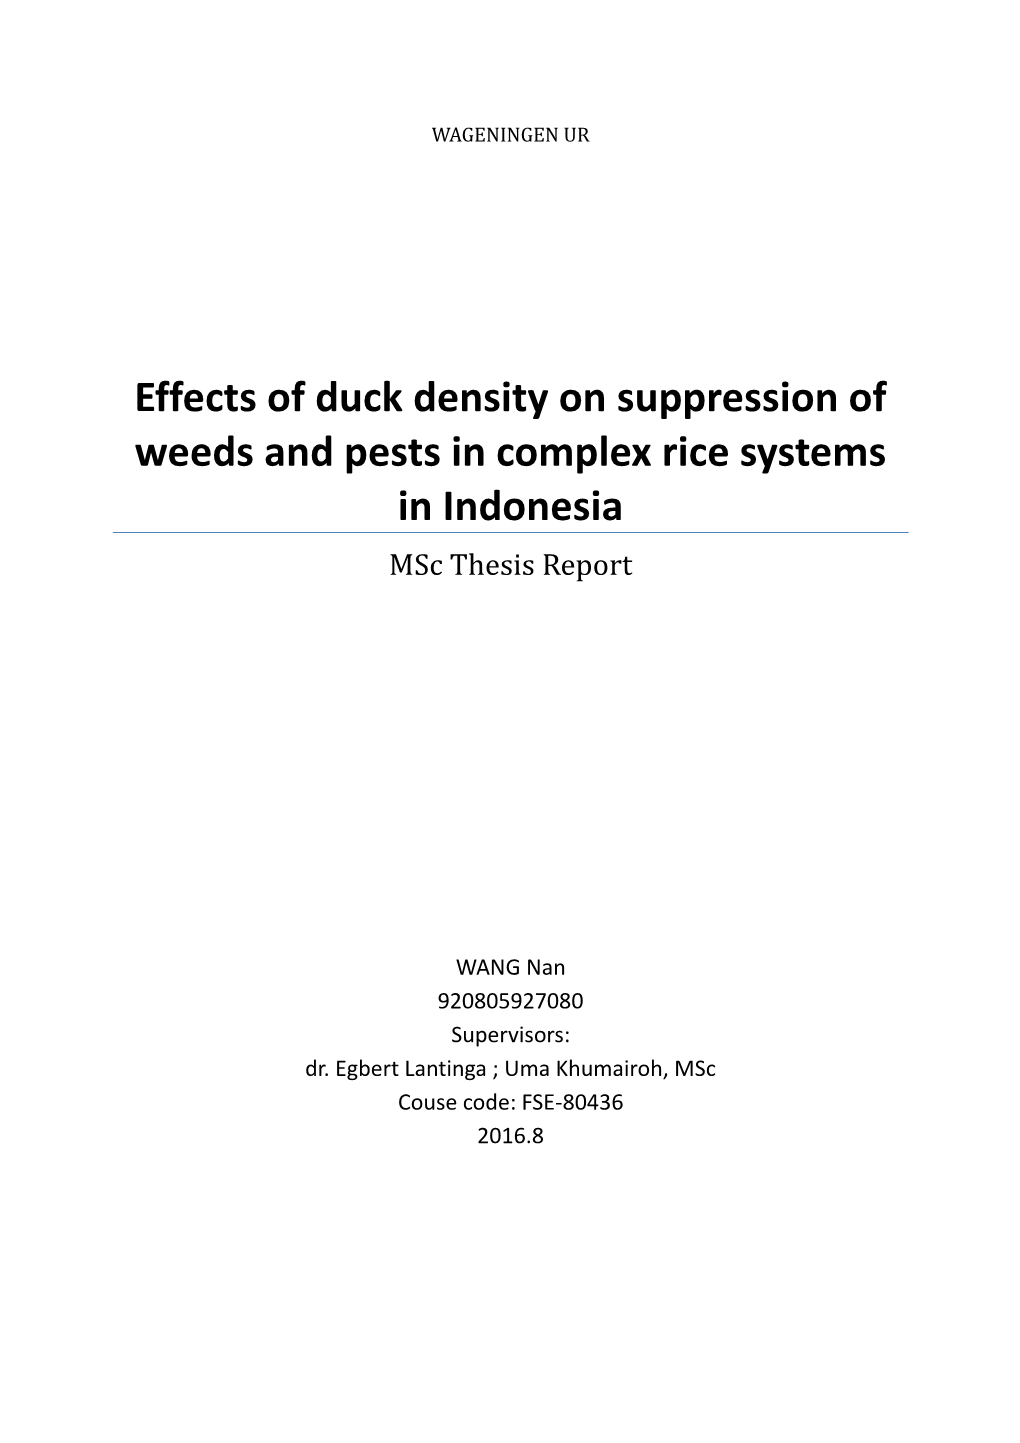 Effects of Duck Density on Suppression of Weeds and Pests in Complex Rice Systems in Indonesia Msc Thesis Report